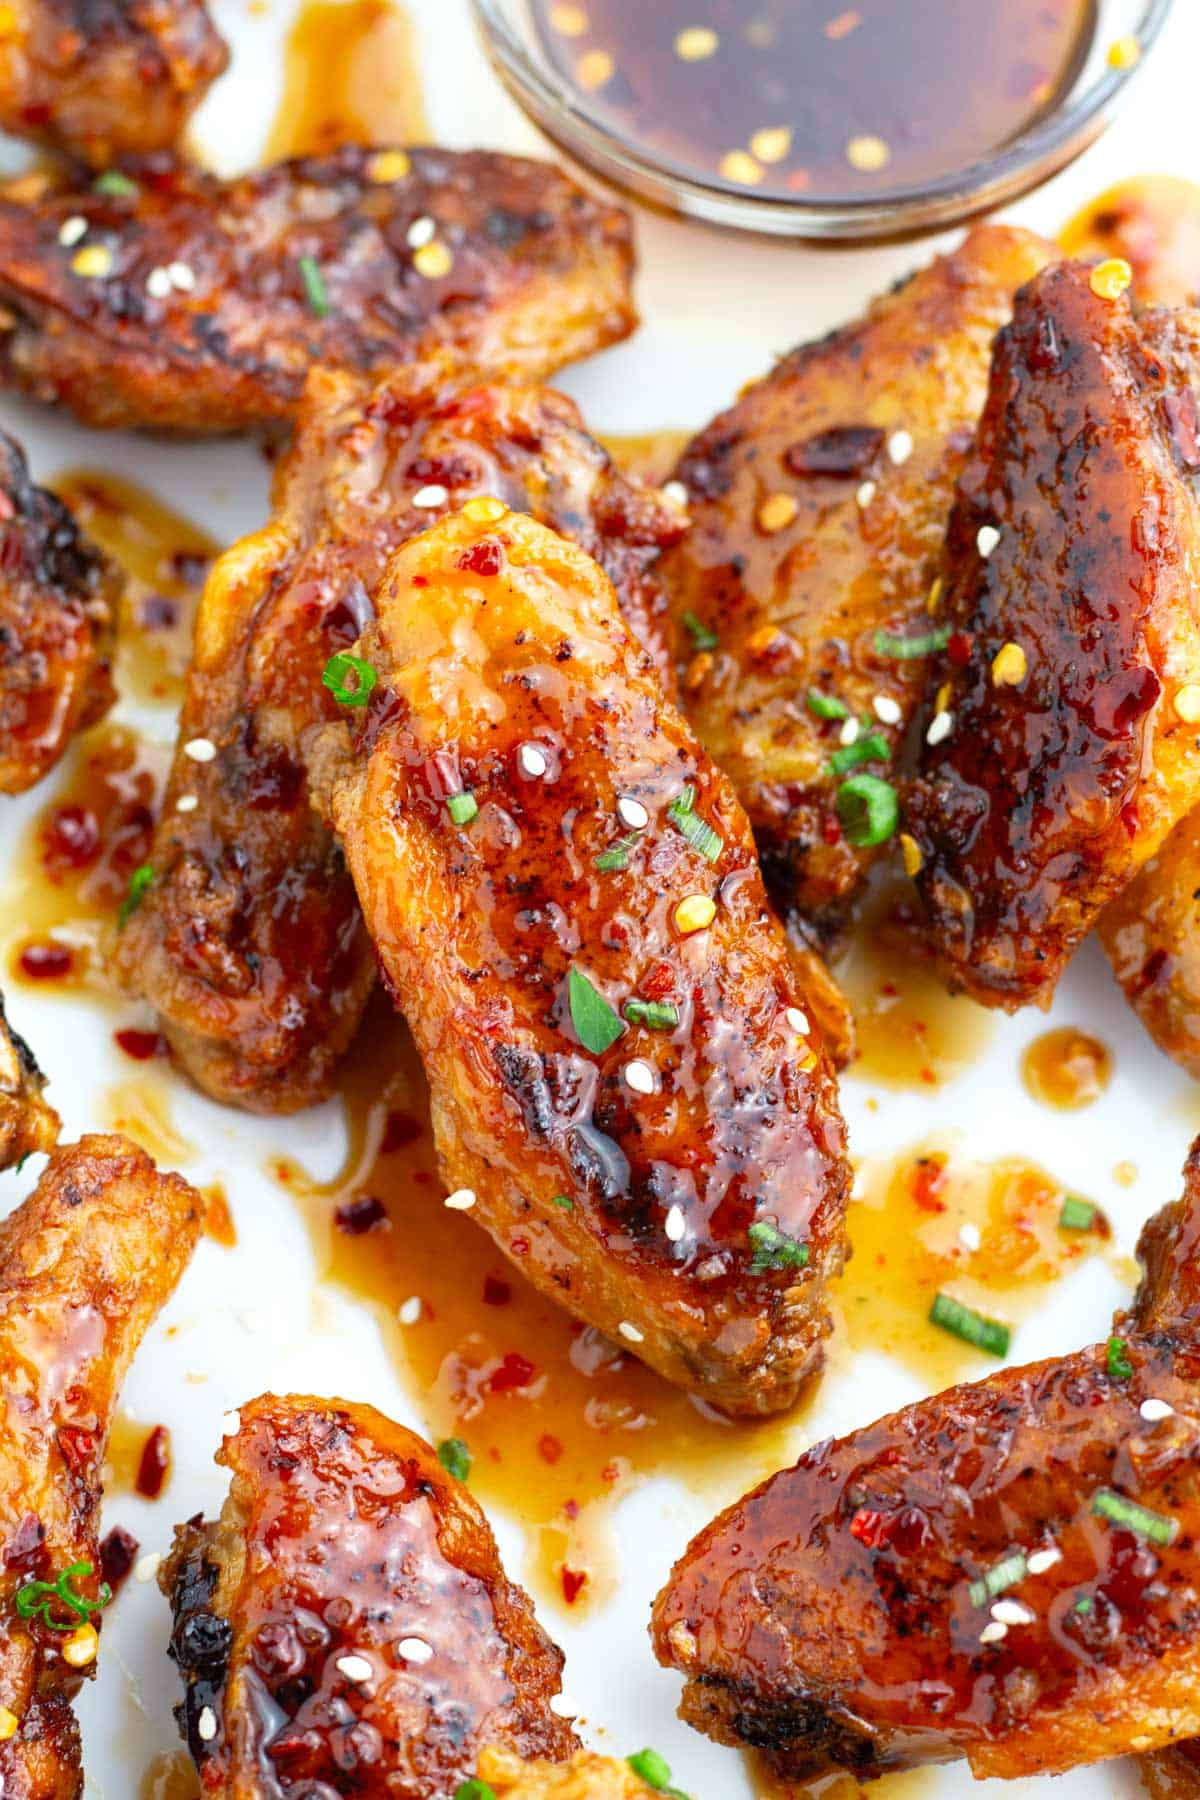 Sweet chili glaze covering chicken wings.